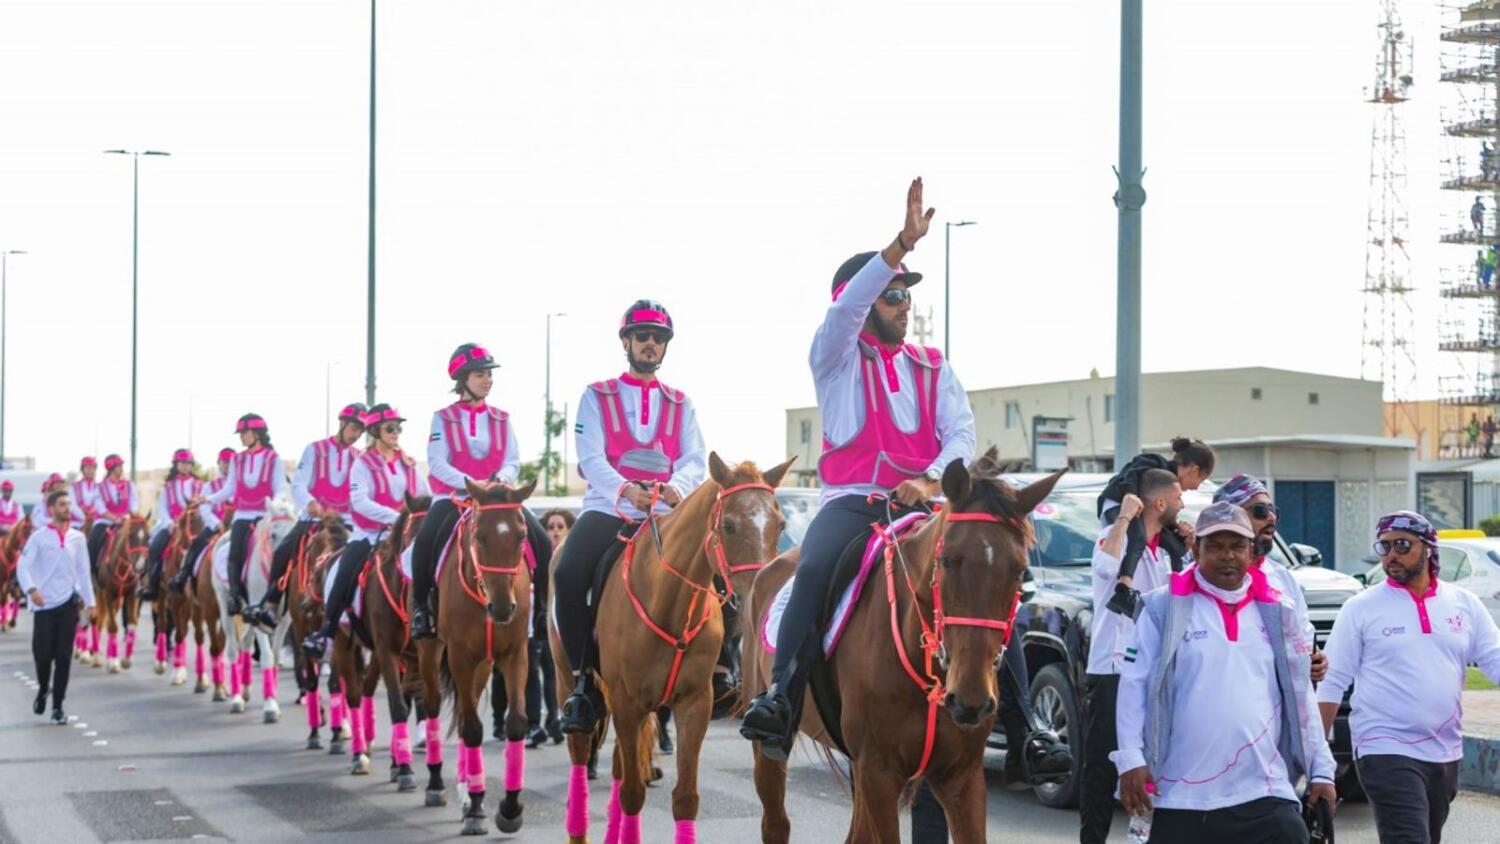 Over 13,000 free cancer screenings in 7 days: UAE's Pink Caravan Ride sets new record with 11th edition